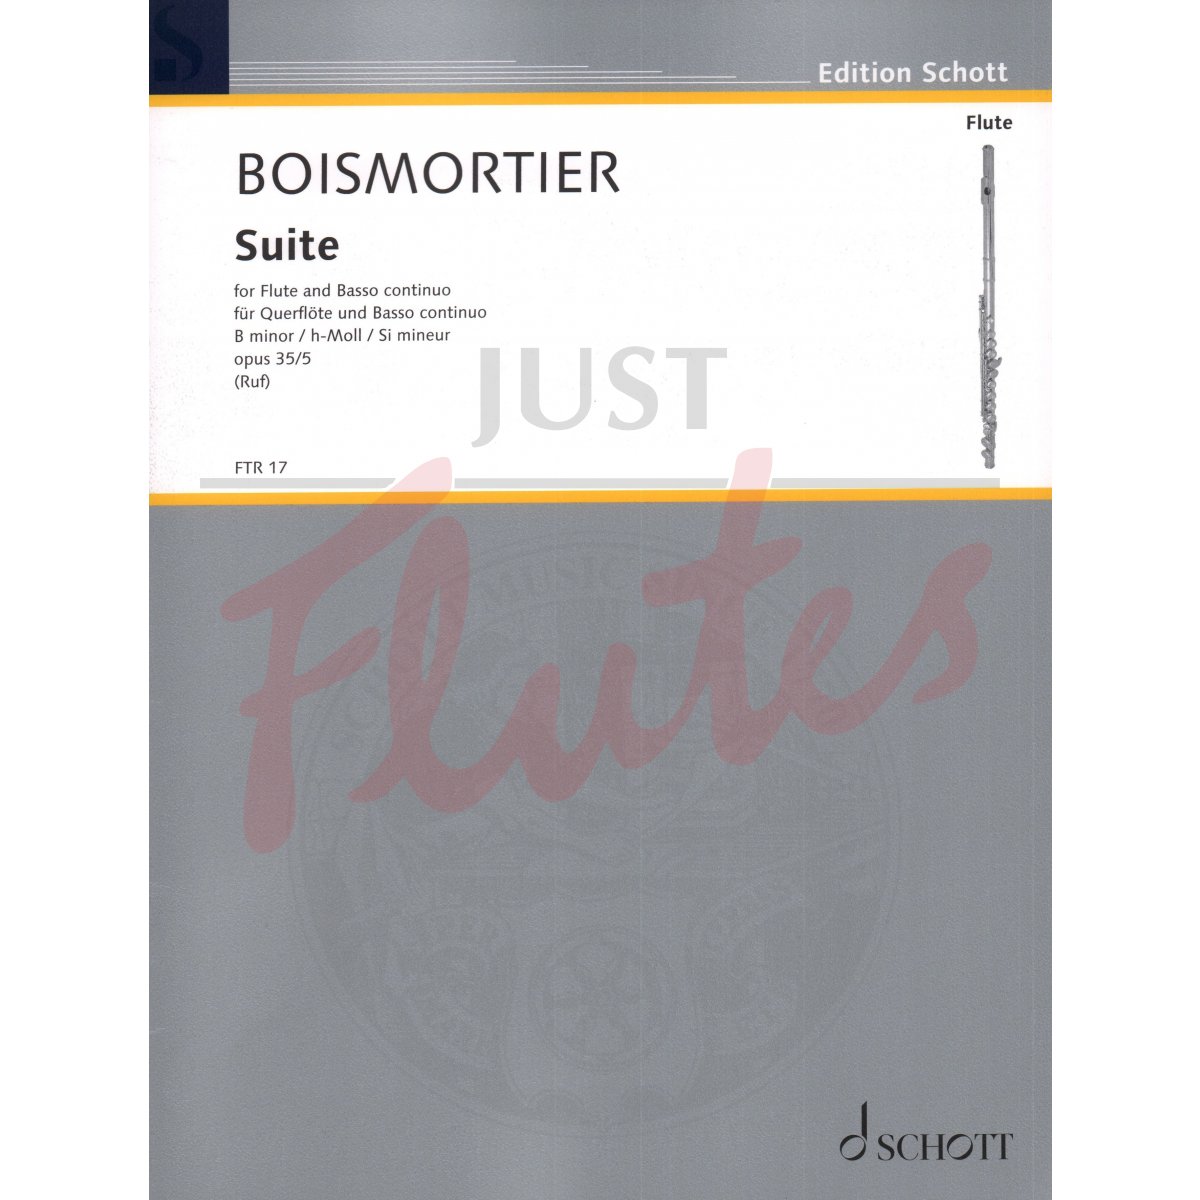 Suite in B minor for Flute and Basso Continuo